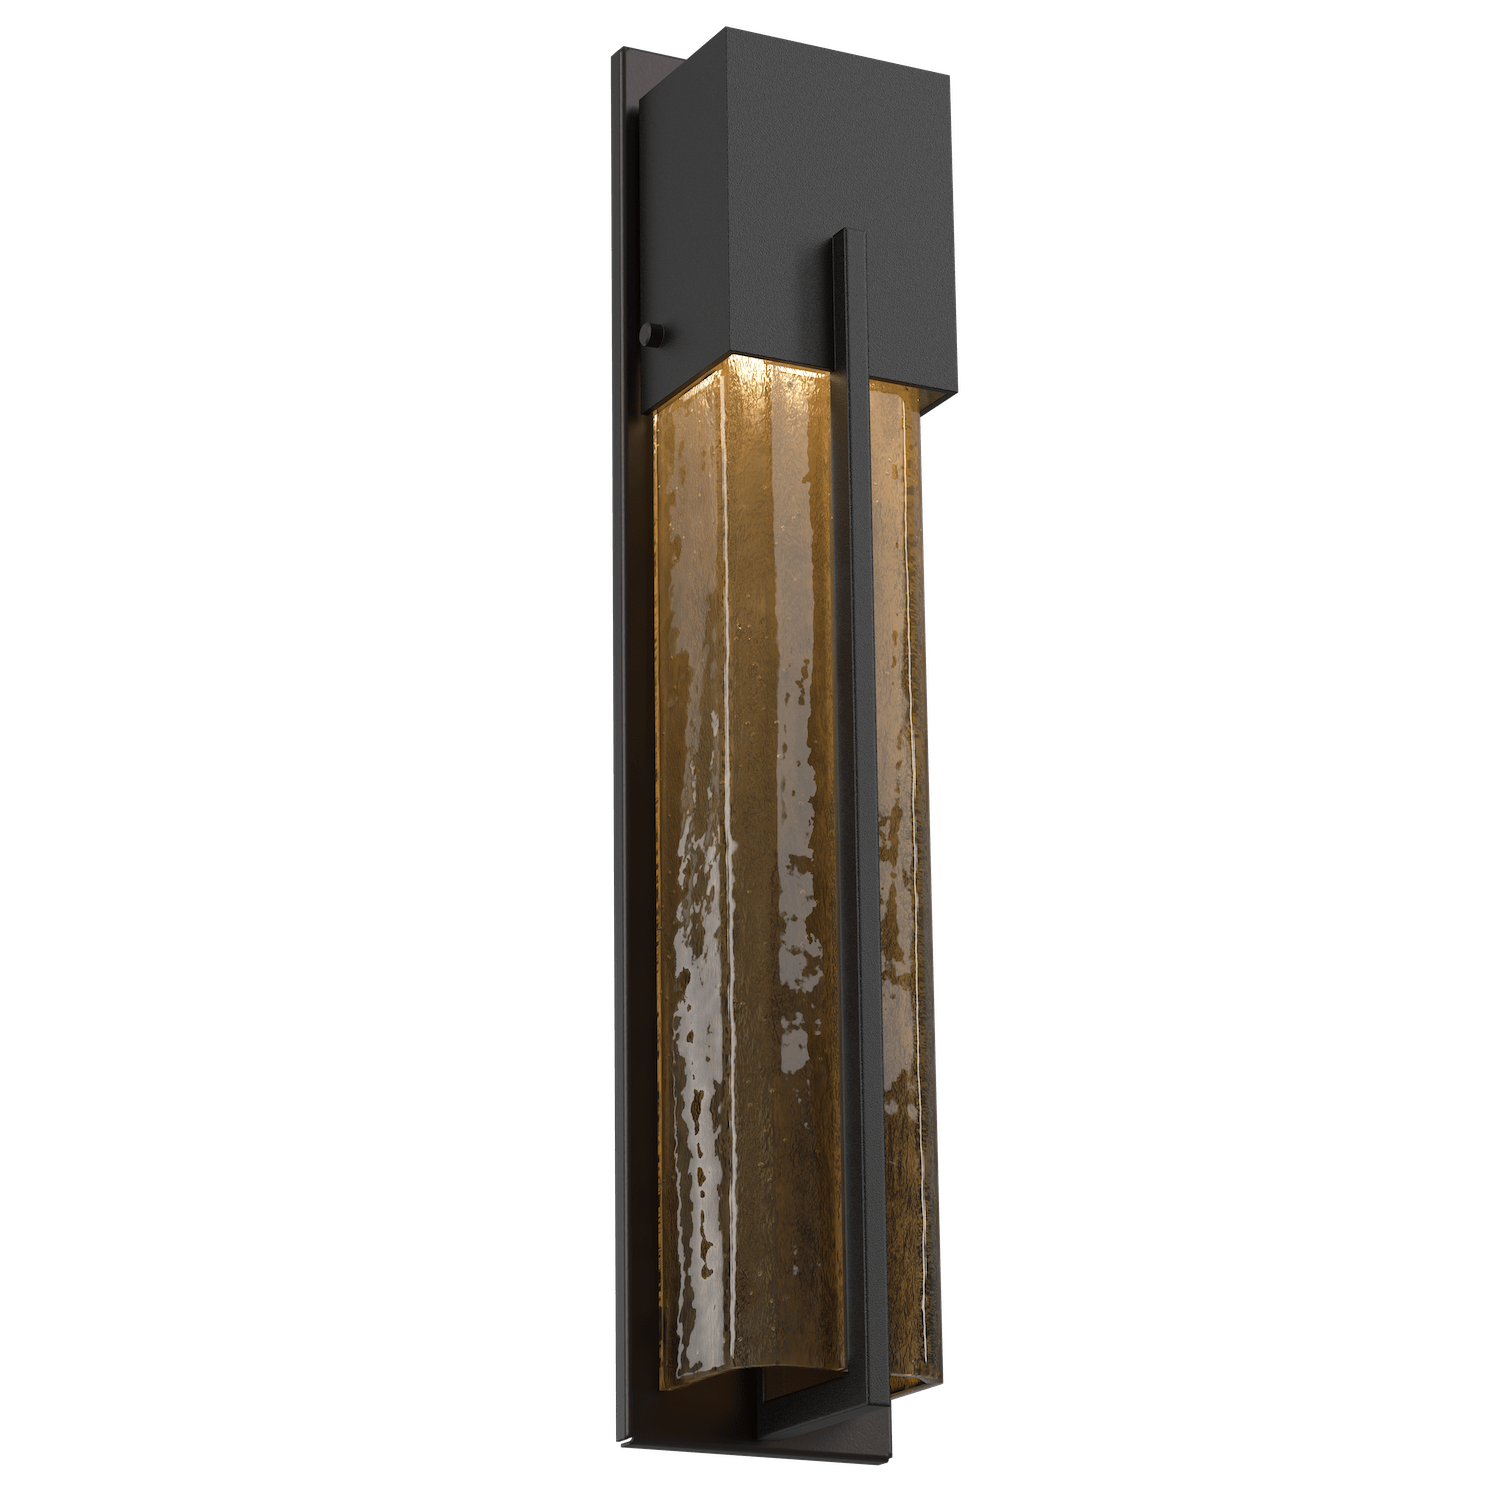 ODB0055-23-TB-BG-Hammerton-Studio-23-inch-outdoor-sconce-with-square-bronze-granite-glass-cover-with-textured-black-finish-and-LED-lamping